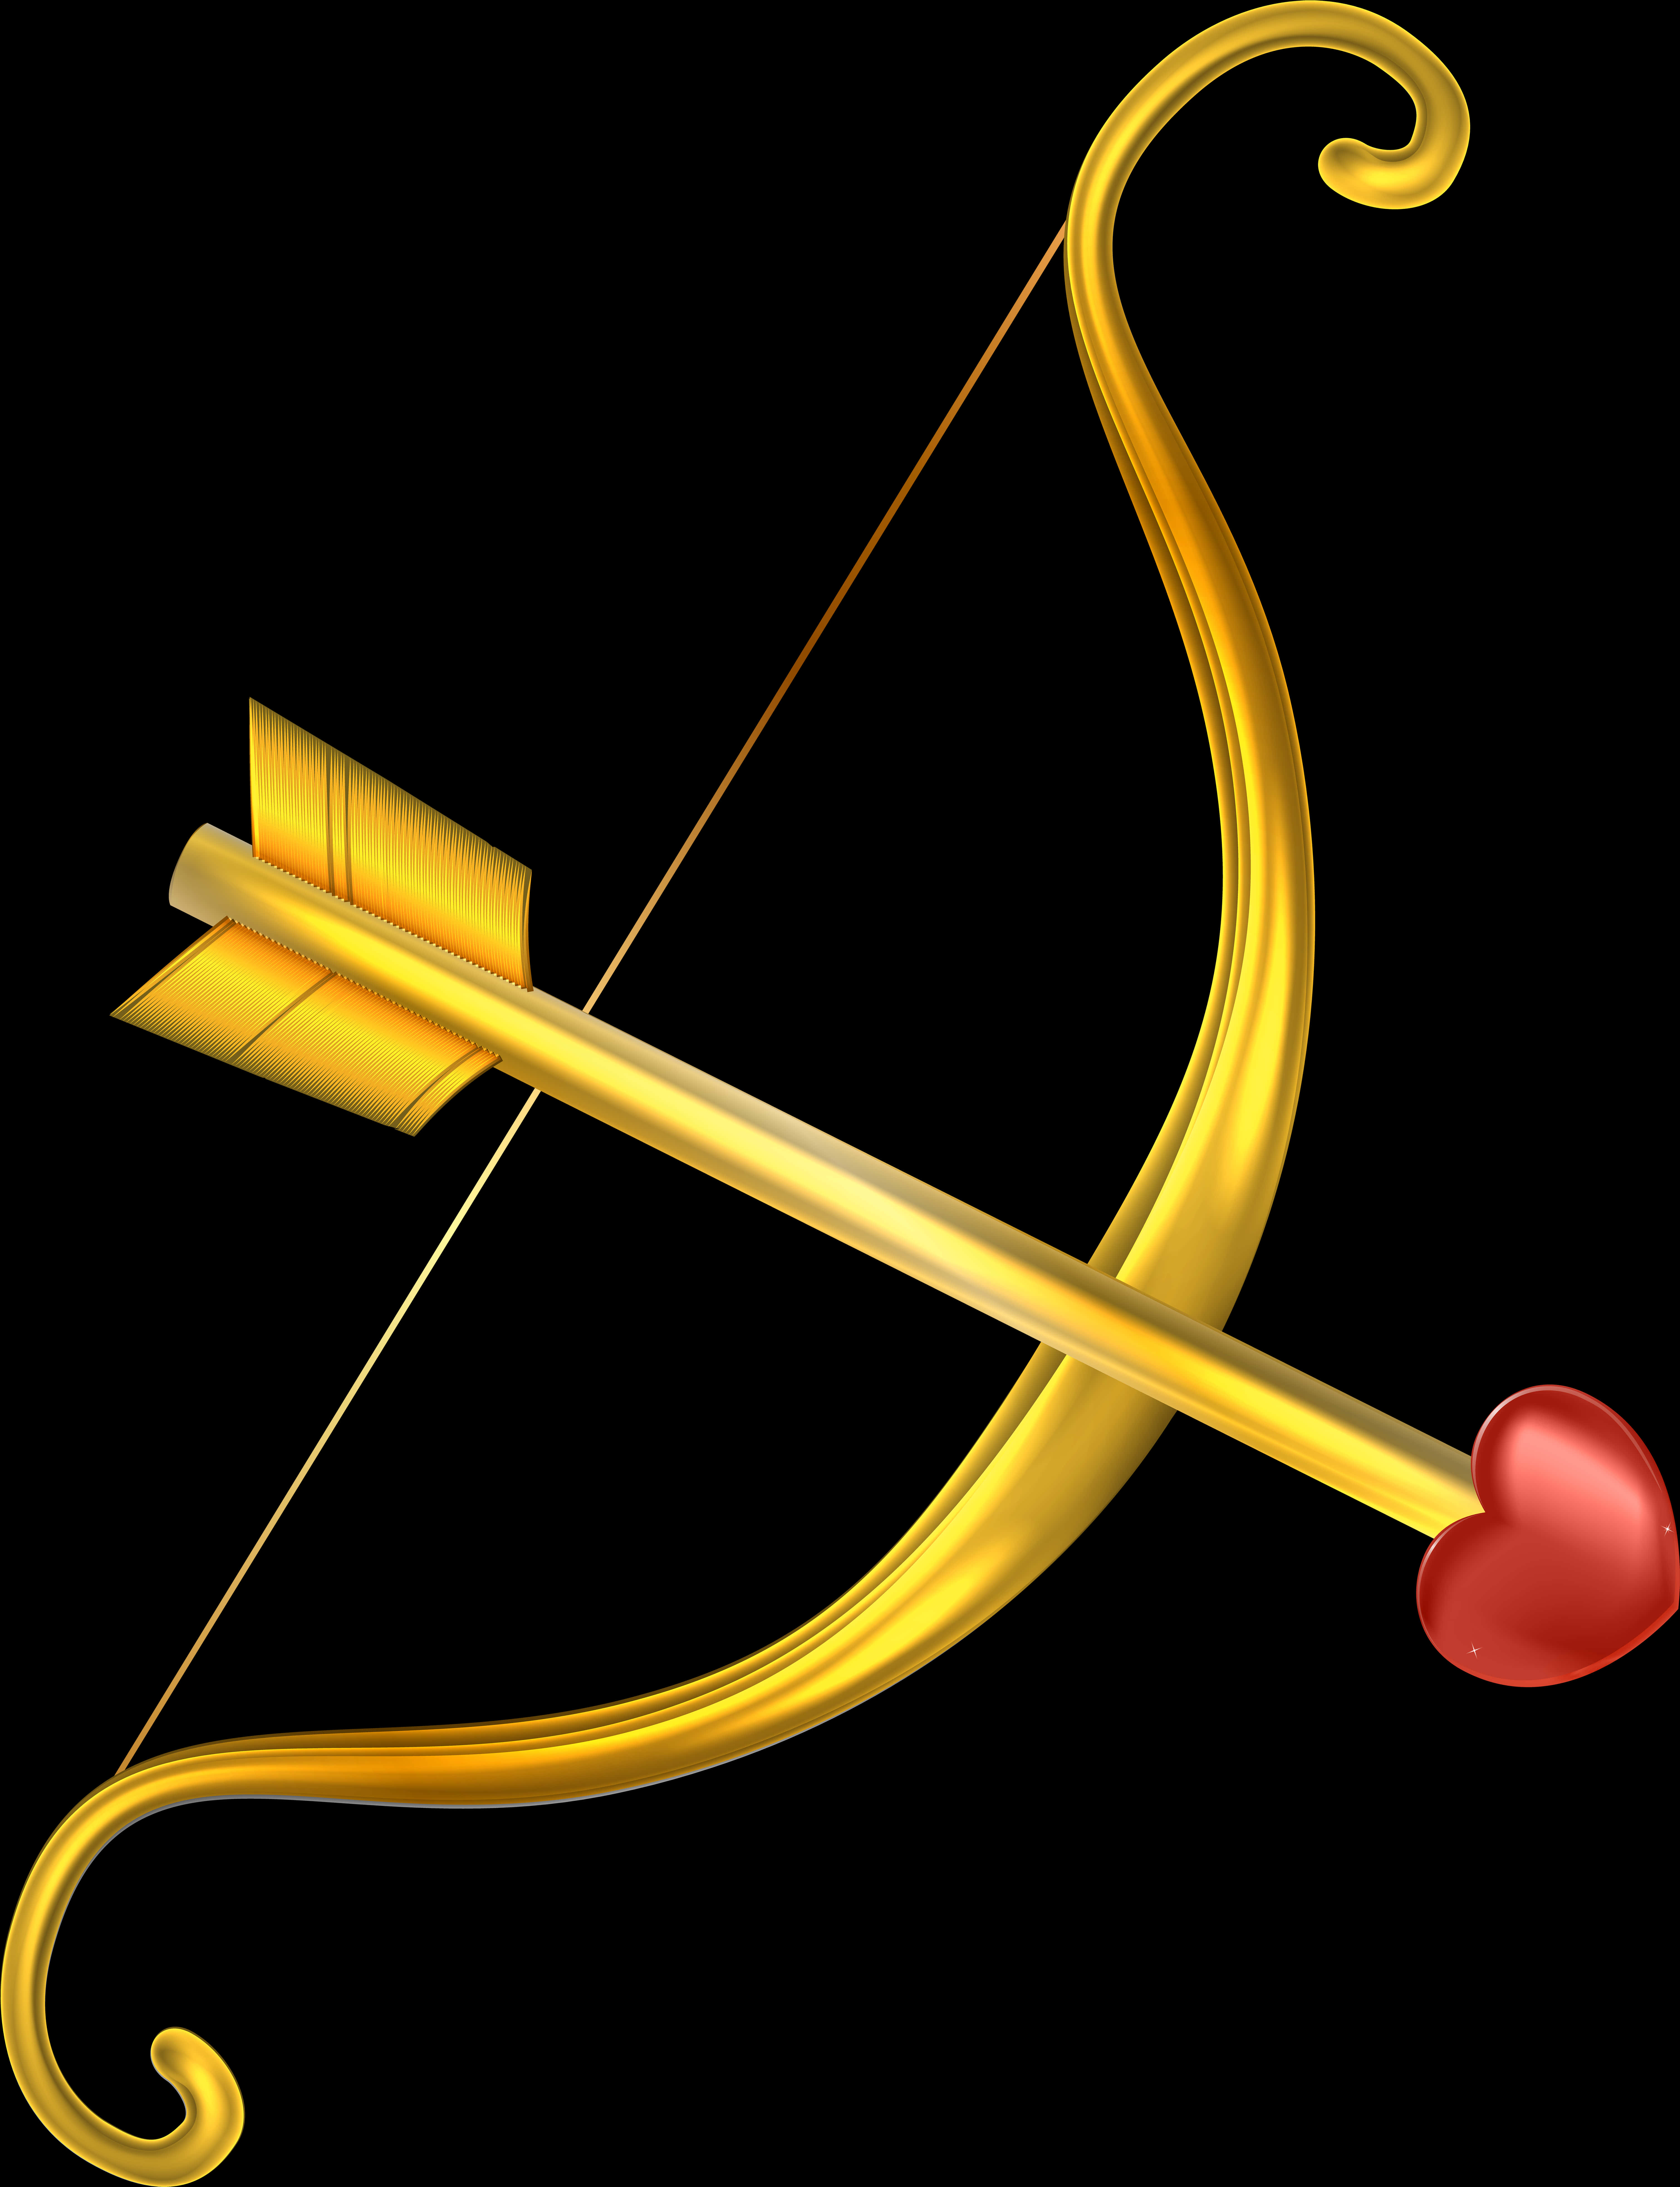 A Gold Bow And Arrow With A Heart On It